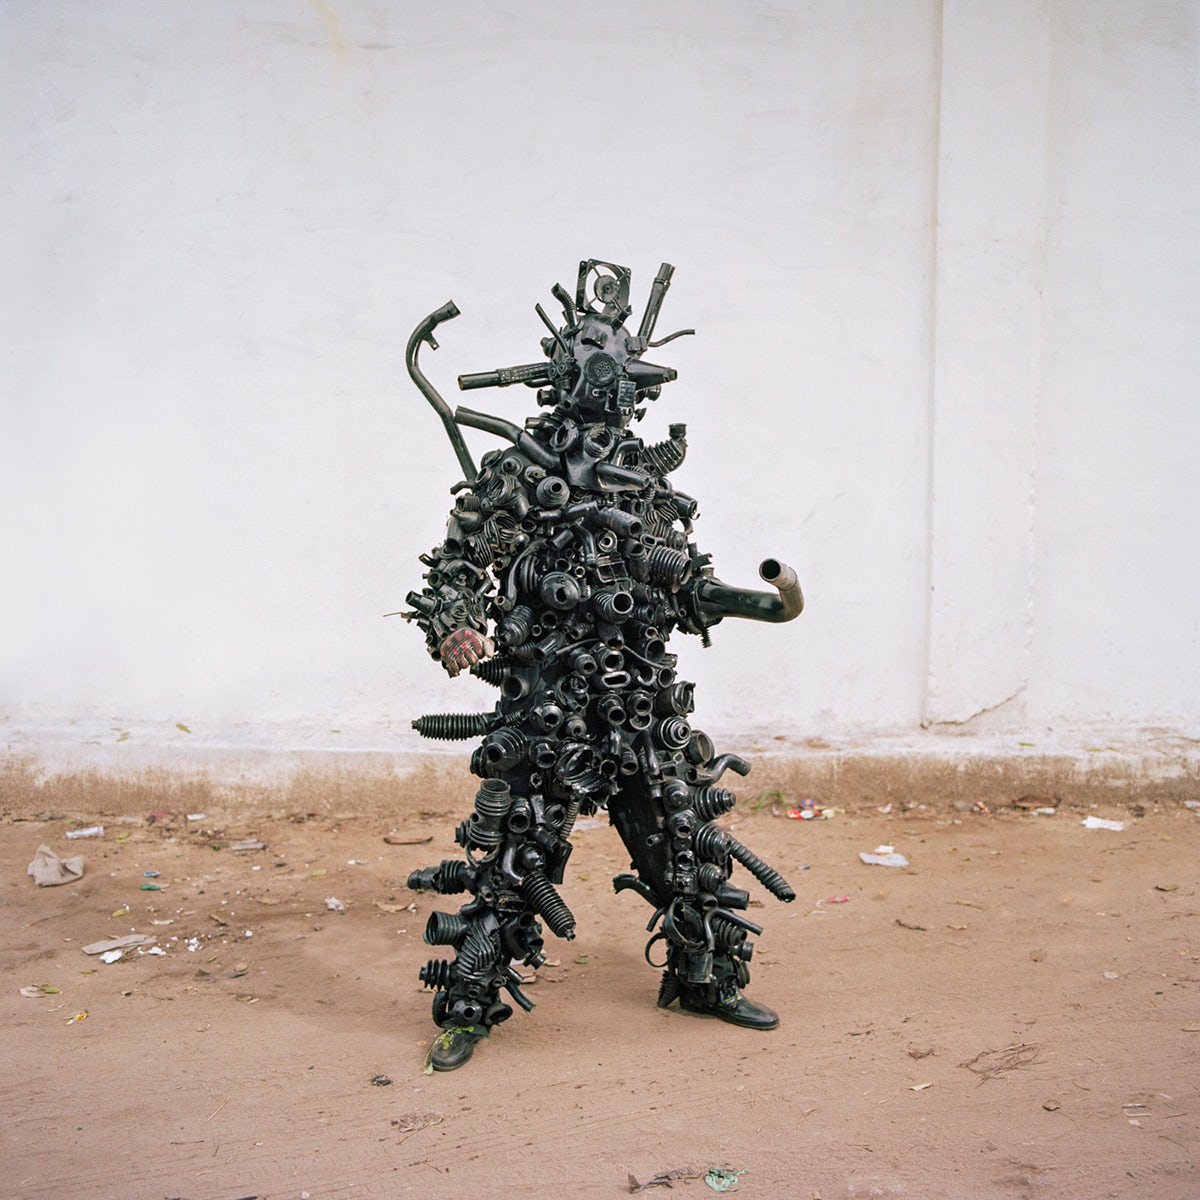 Photo by Colin Delfosse showing a person wearing a dark spiky costume made out of waste such as metallic pipes, stood on rough sandy ground in front of a white wall